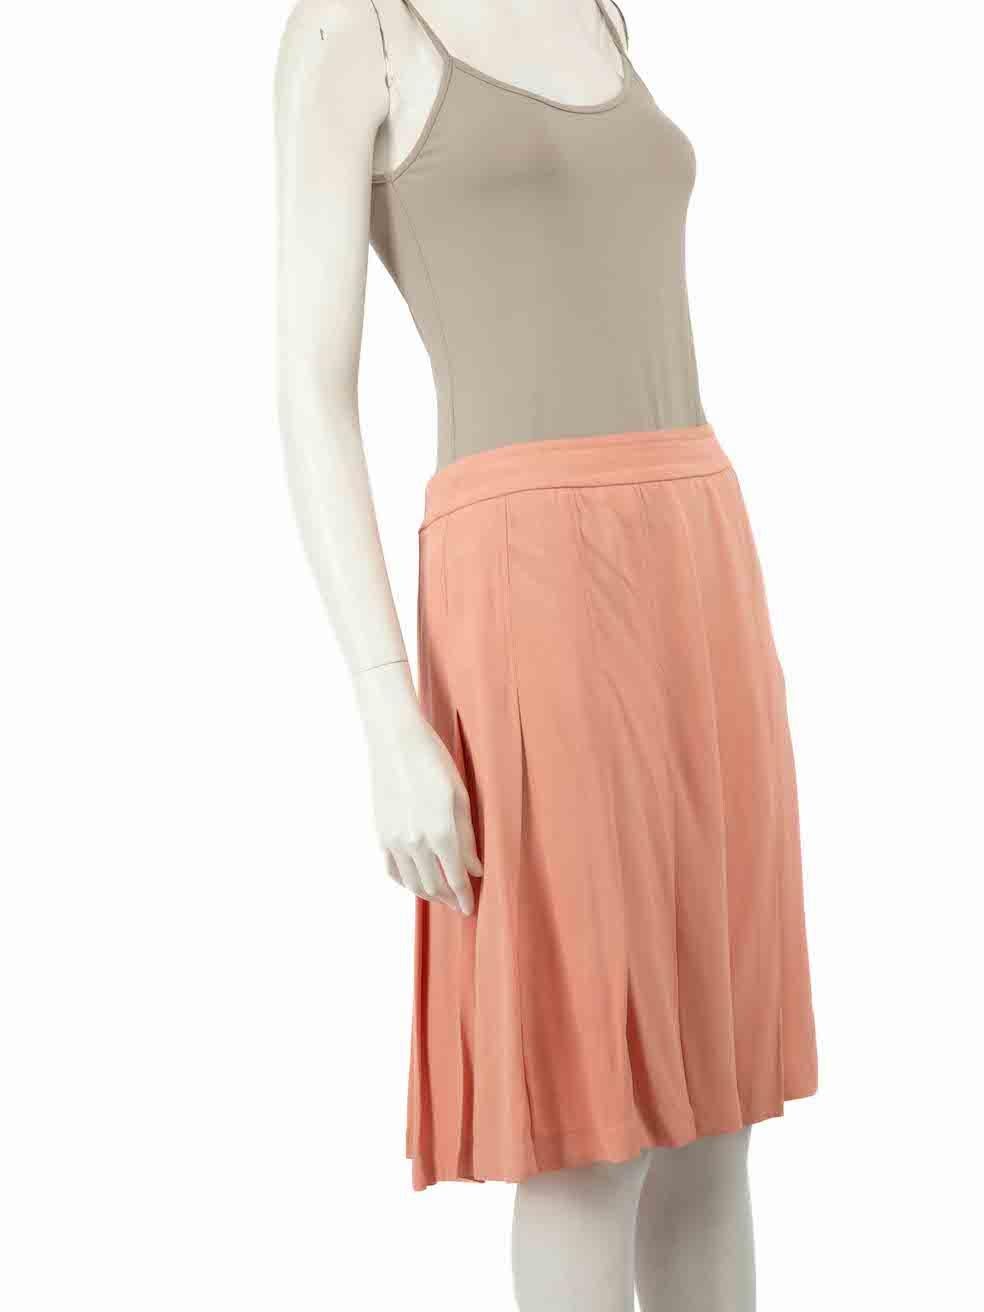 CONDITION is Very good. Hardly any visible wear to skirt is evident on this used Marni designer resale item.
 
 
 
 Details
 
 
 Pink
 
 Viscose
 
 Pleated skirt
 
 Knee length
 
 Side zip closure
 
 
 
 
 
 Made in Portugal
 
 
 
 Composition
 
